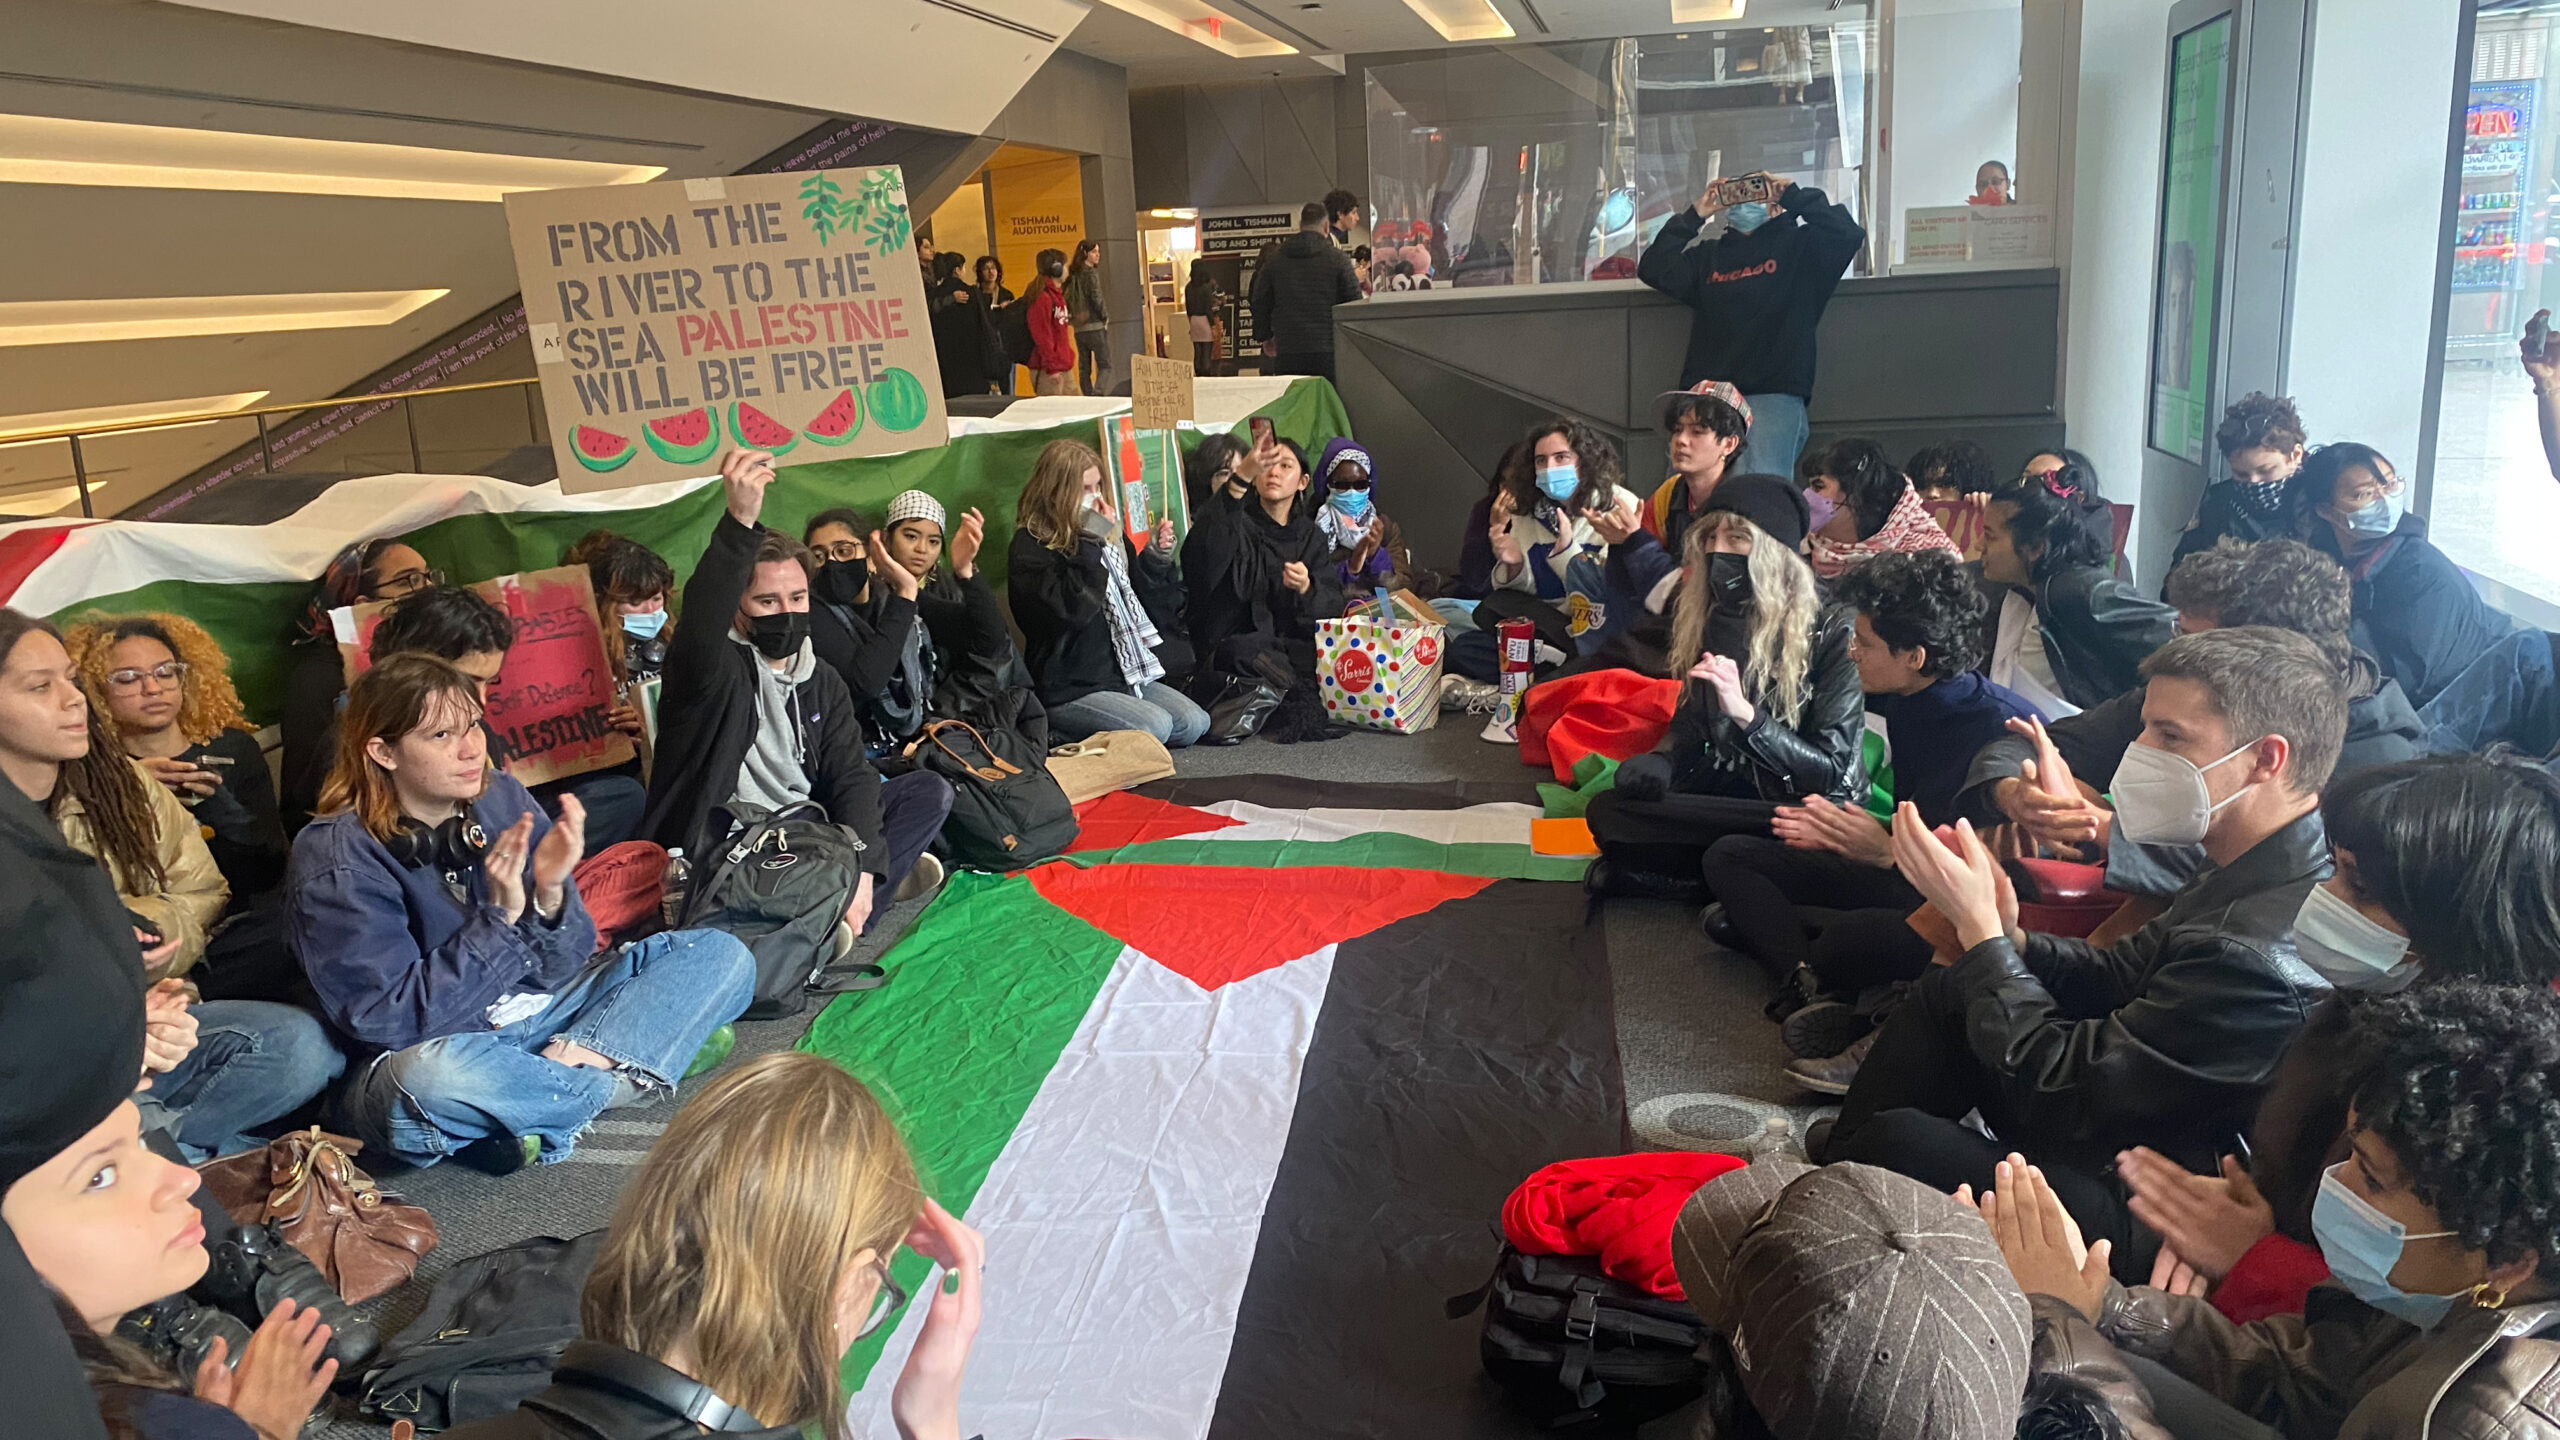 Students sit in a circle in front of the turnstiles at the University Center. In the center of the circle is one large Palestinian flag. One student to the left holds a sign that reads “From The River To The Sea, Palestine Will Be Free.”